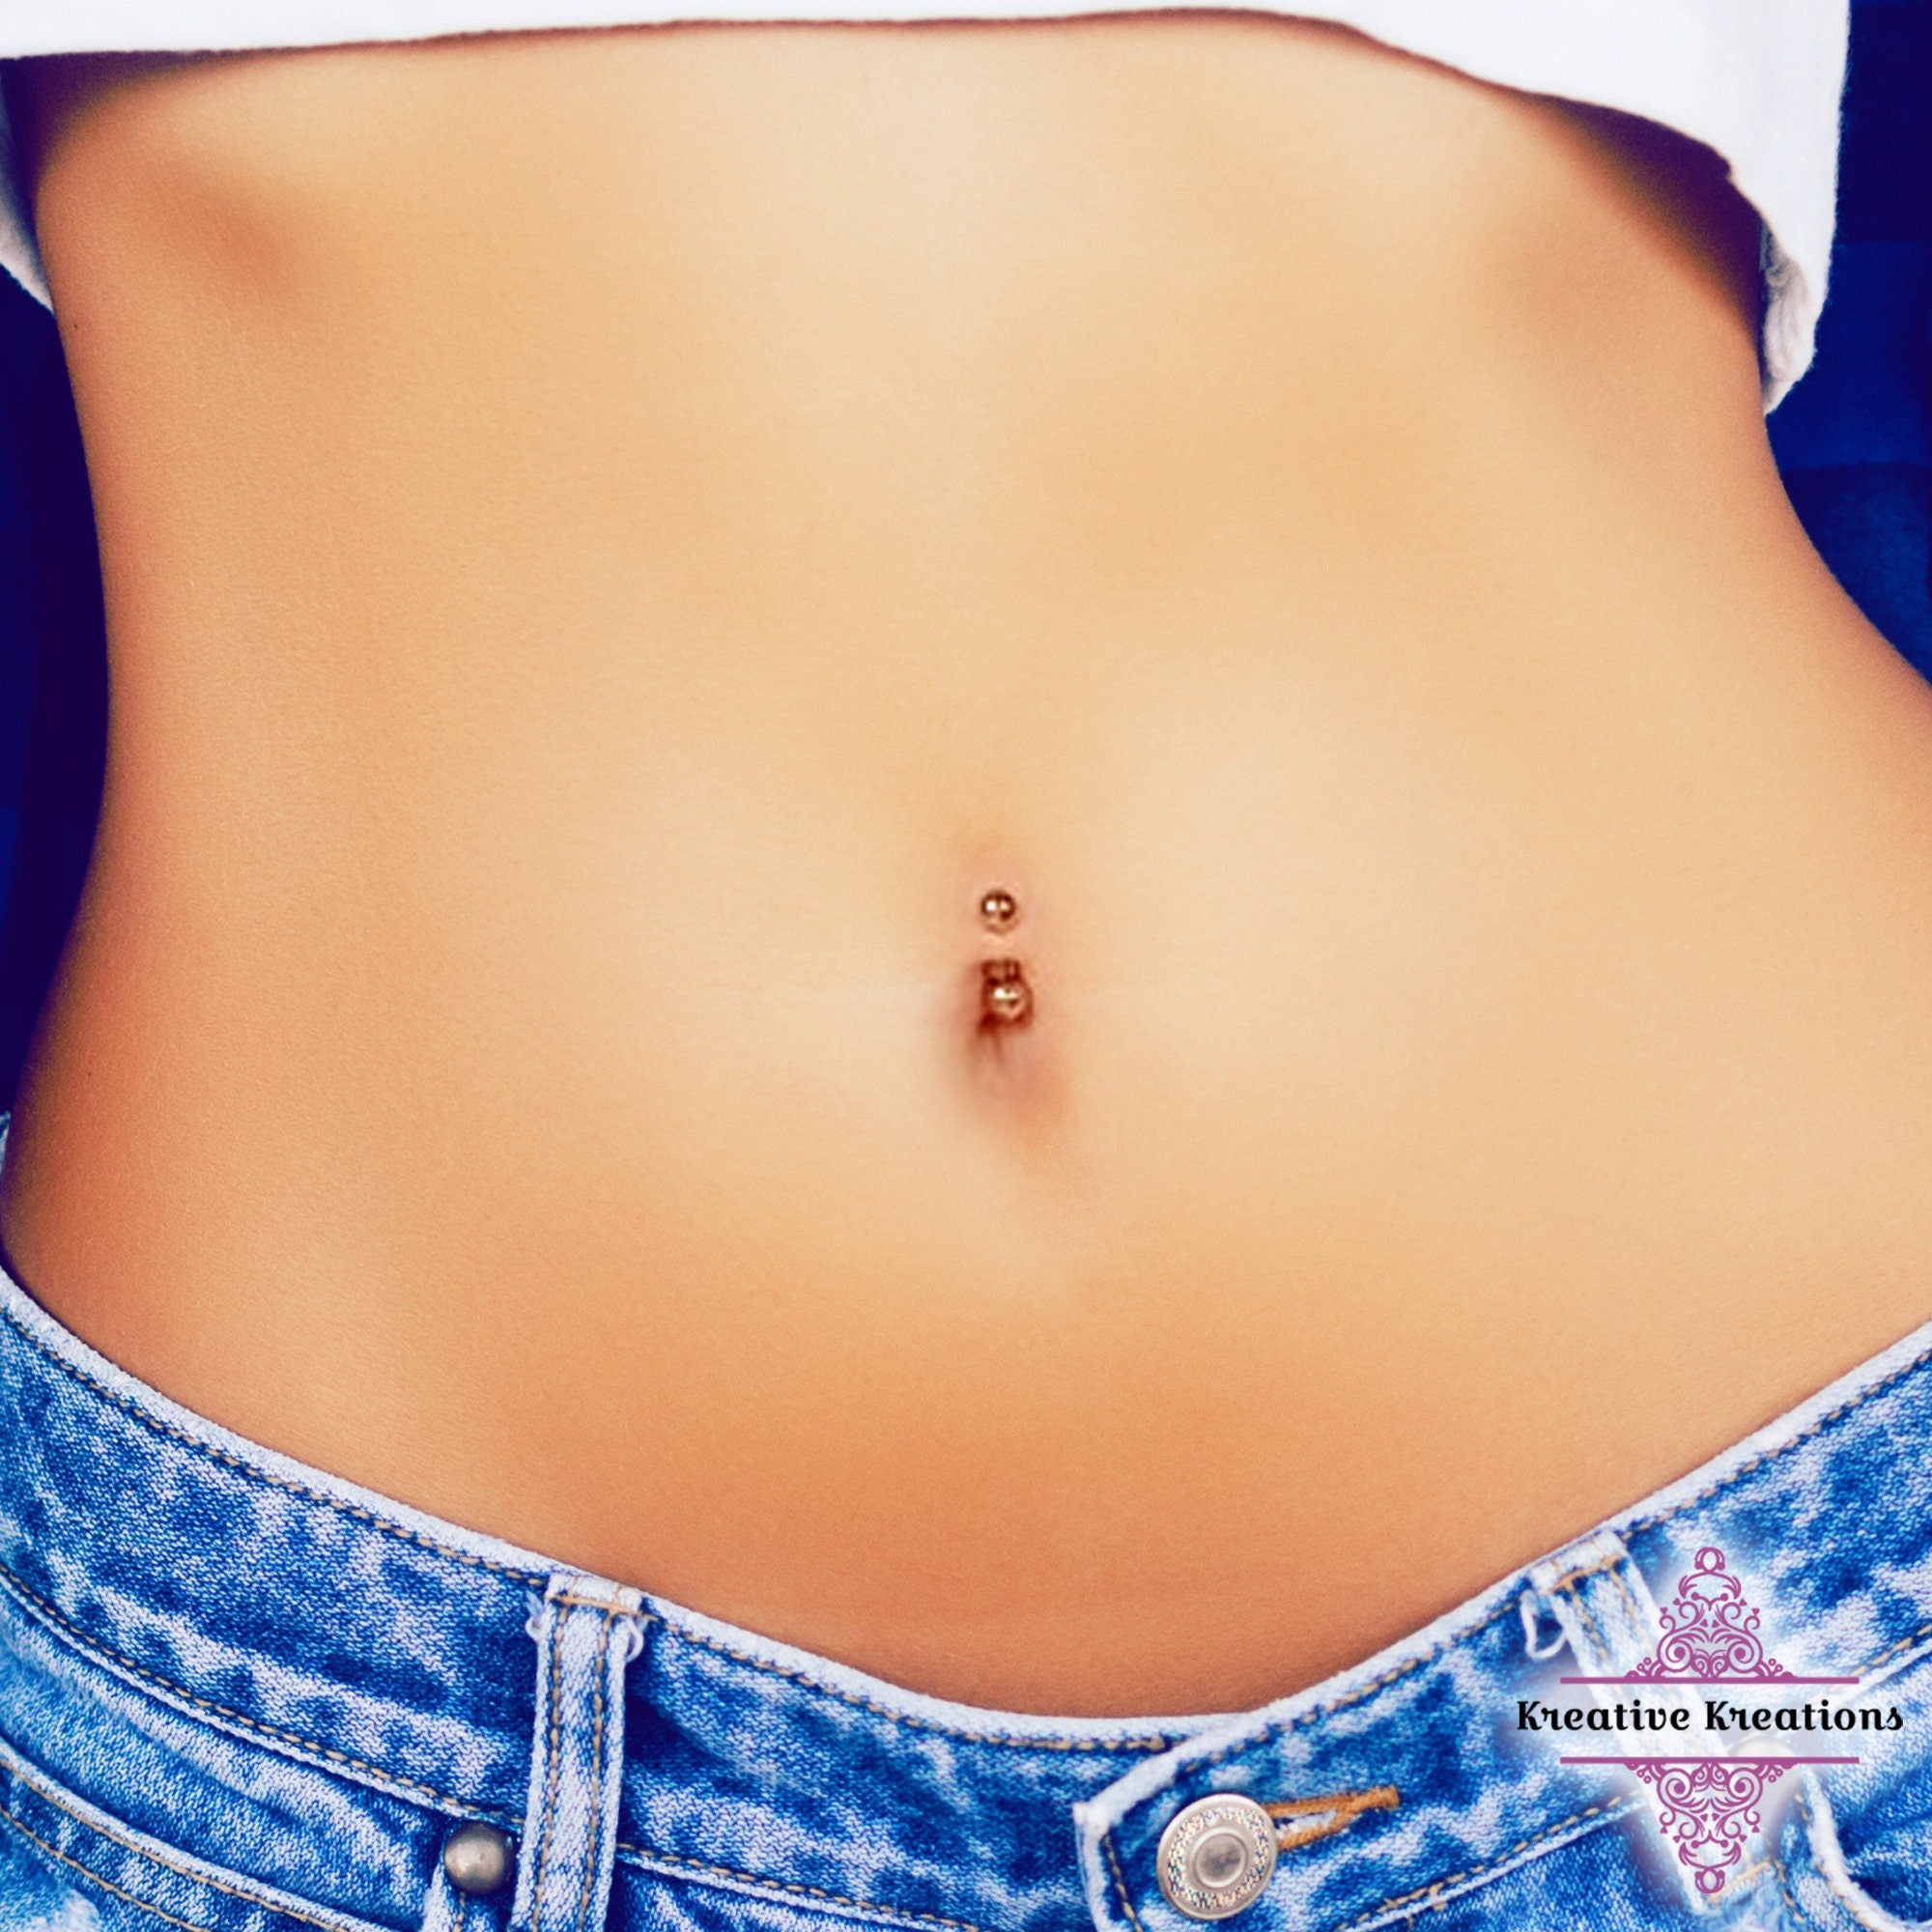 Belly Button Piercing Popularity in 2020 - Coveteur: Inside Closets,  Fashion, Beauty, Health, and Travel